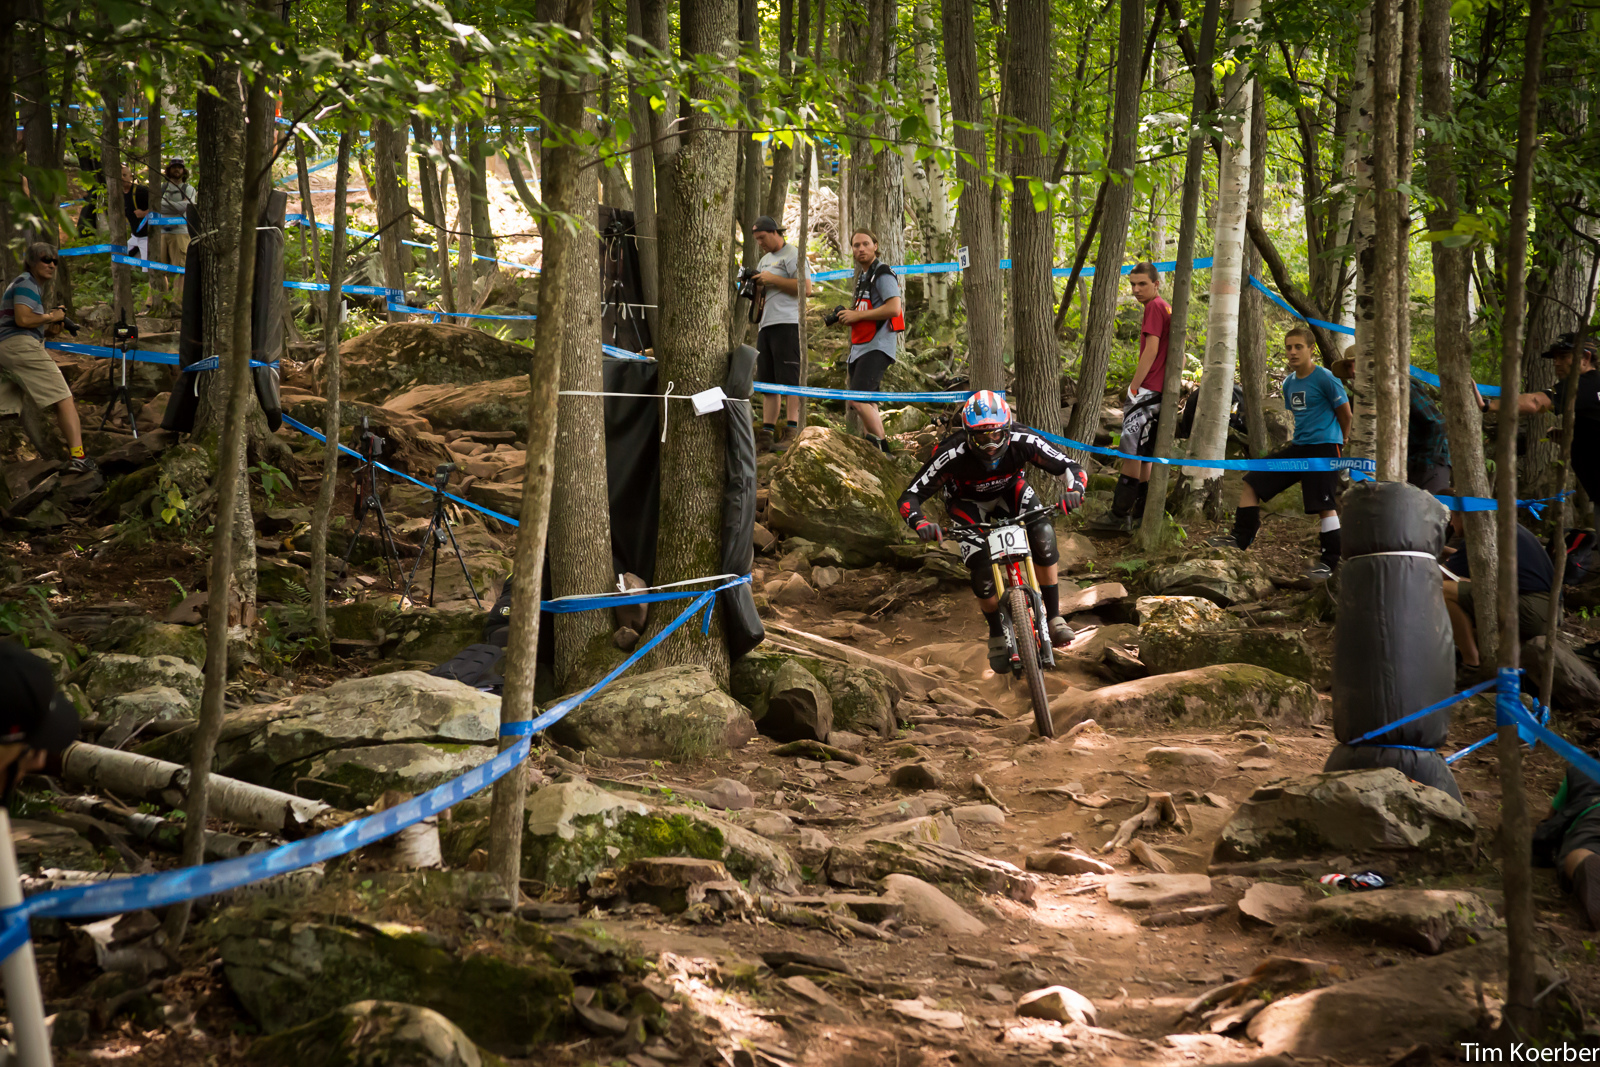 Neko on his way to a third place finish in seeding at round 6 of the UCI World Cup at WIndham.